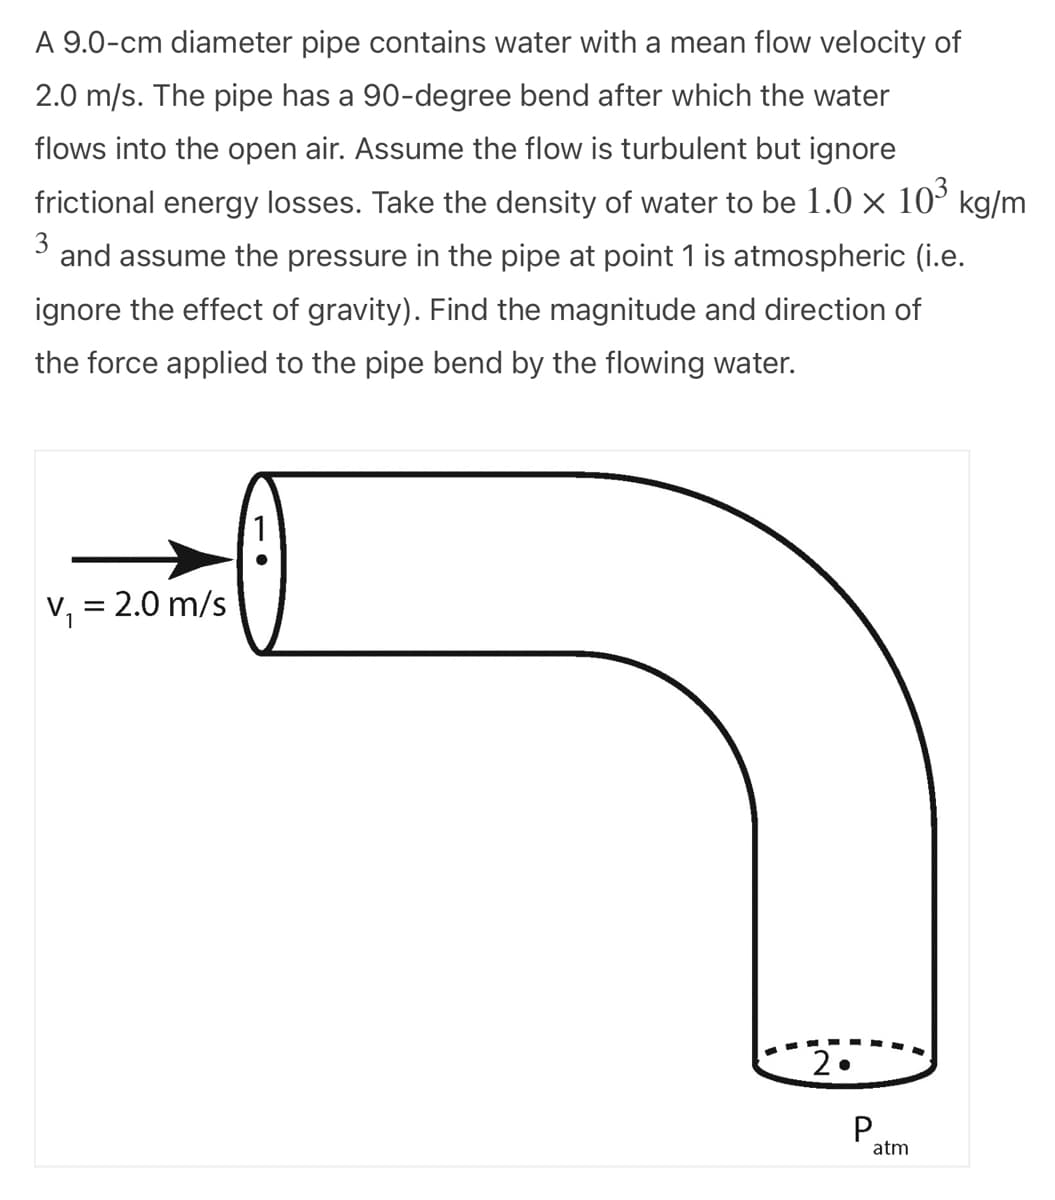 A 9.0-cm diameter pipe contains water with a mean flow velocity of
2.0 m/s. The pipe has a 90-degree bend after which the water
flows into the open air. Assume the flow is turbulent but ignore
frictional energy losses. Take the density of water to be 1.0 × 10³ kg/m
3 and assume the pressure in the pipe at point 1 is atmospheric (i.e.
ignore the effect of gravity). Find the magnitude and direction of
the force applied to the pipe bend by the flowing water.
V₁ 2.0 m/s
=
2
P atm